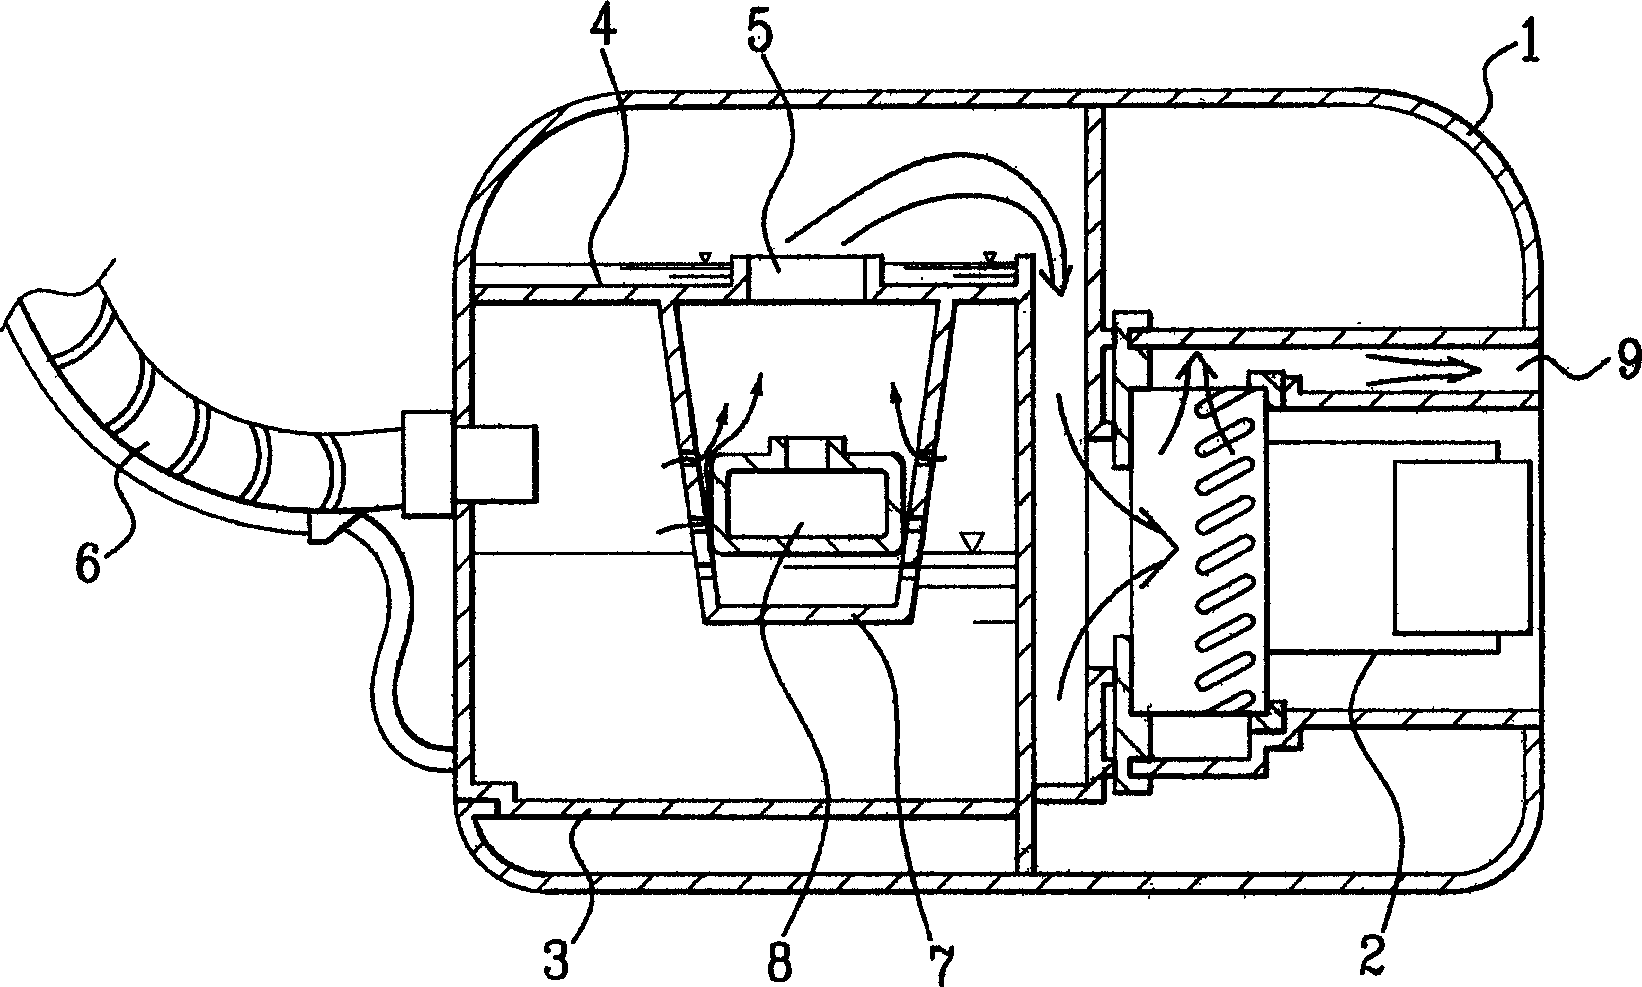 Exhaust structure of vacuum cleaner compatible use in taking up water